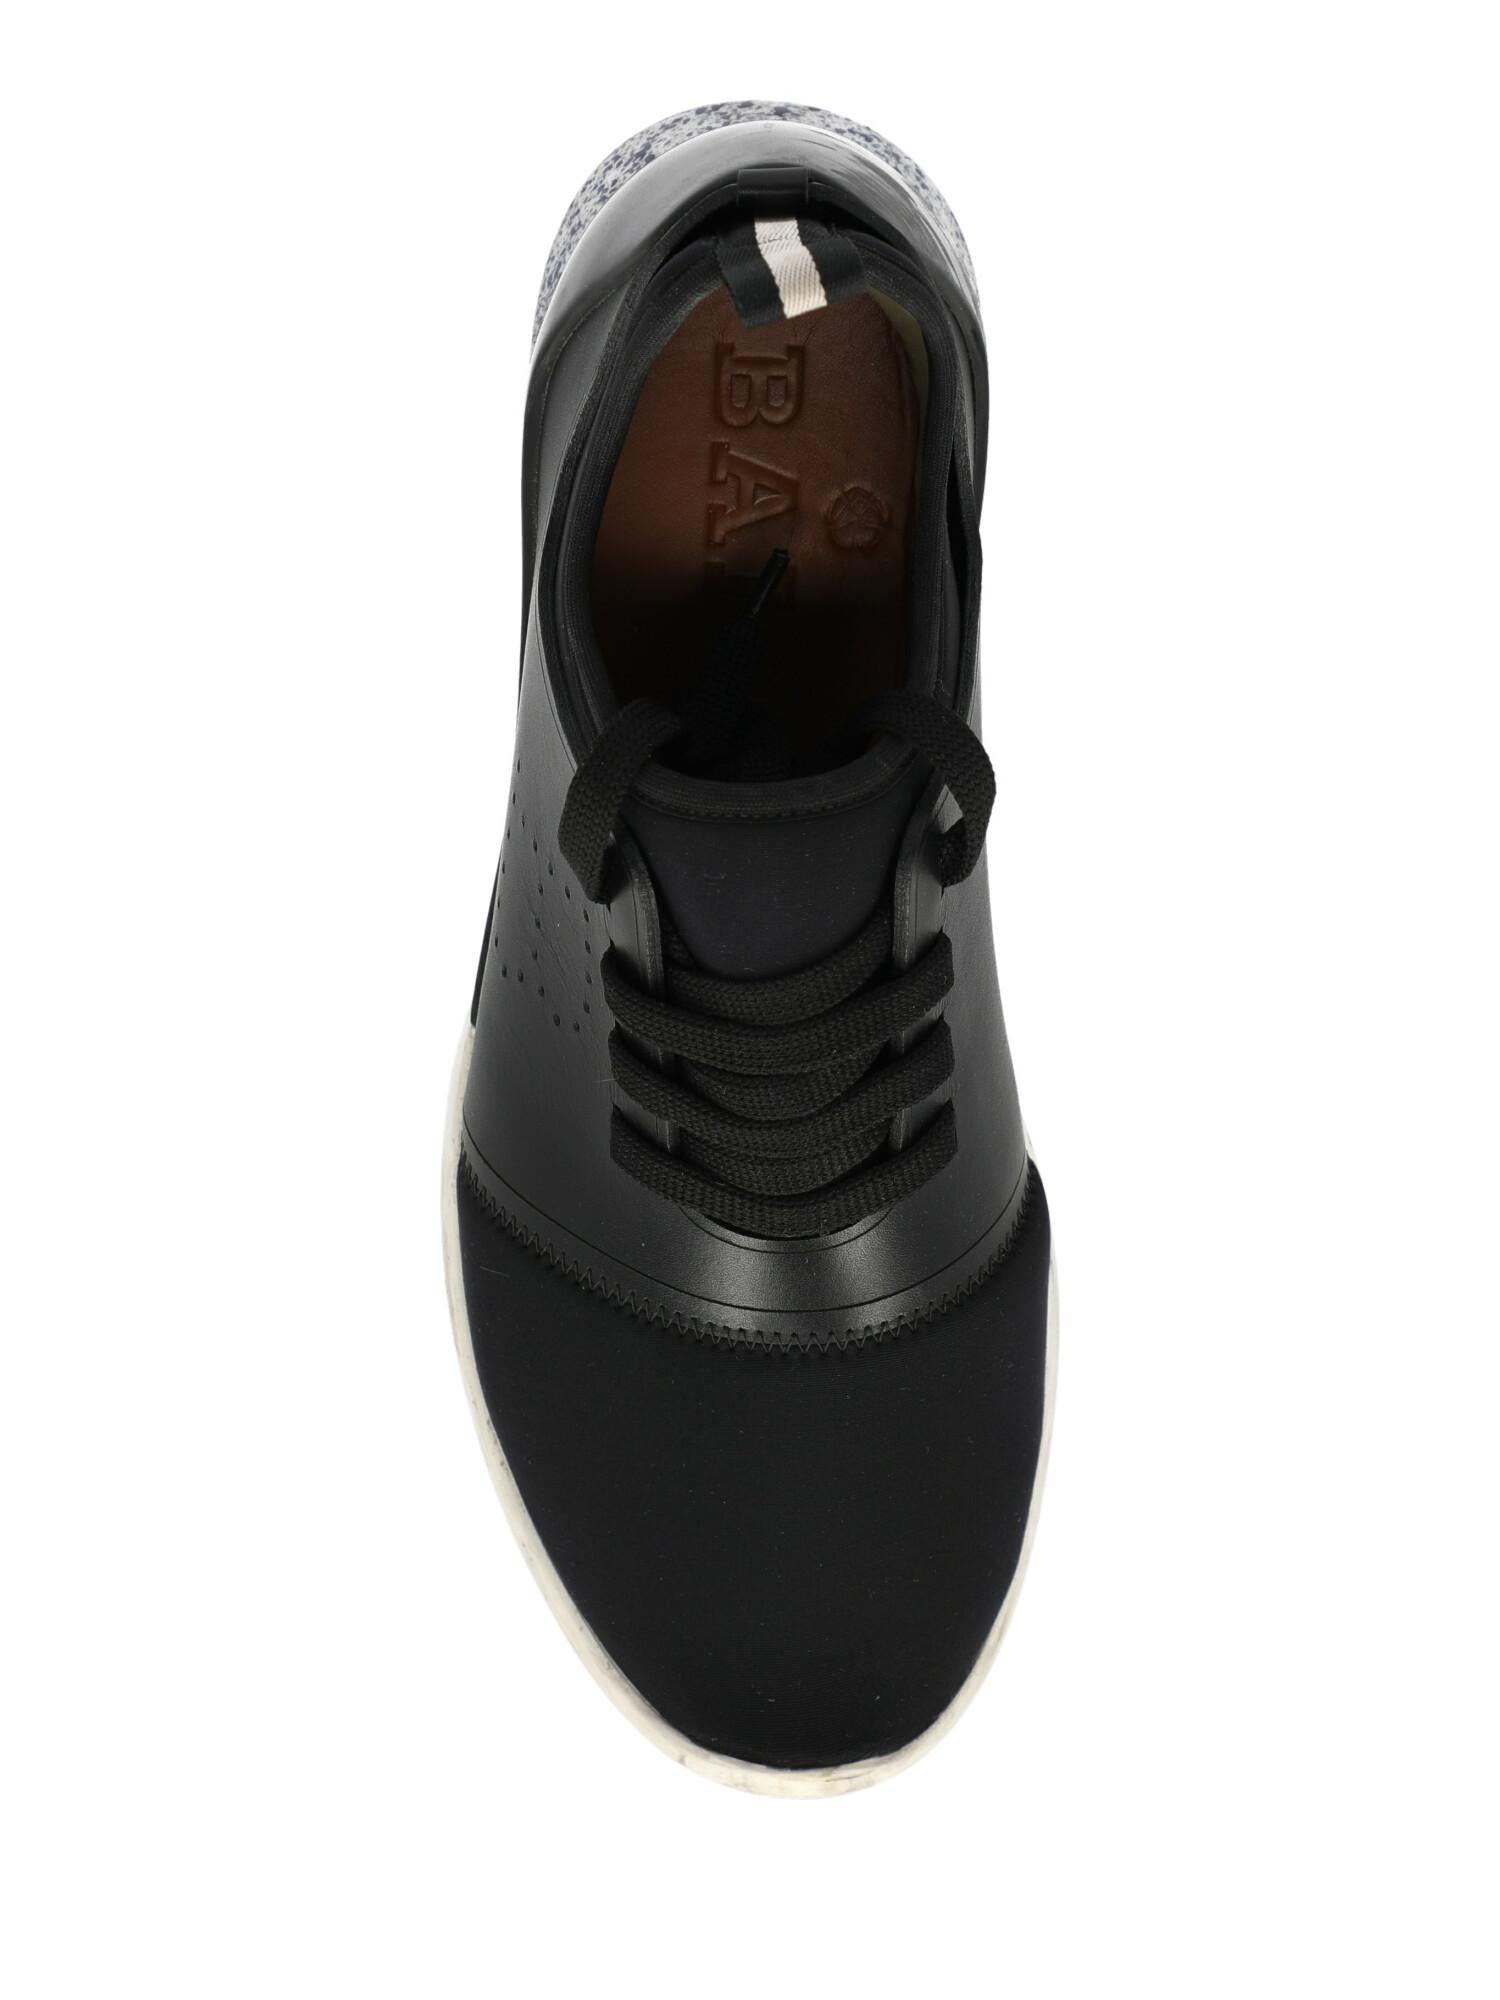 Bally Woman Sneakers Black Synthetic Fibers US 6.5 For Sale 1